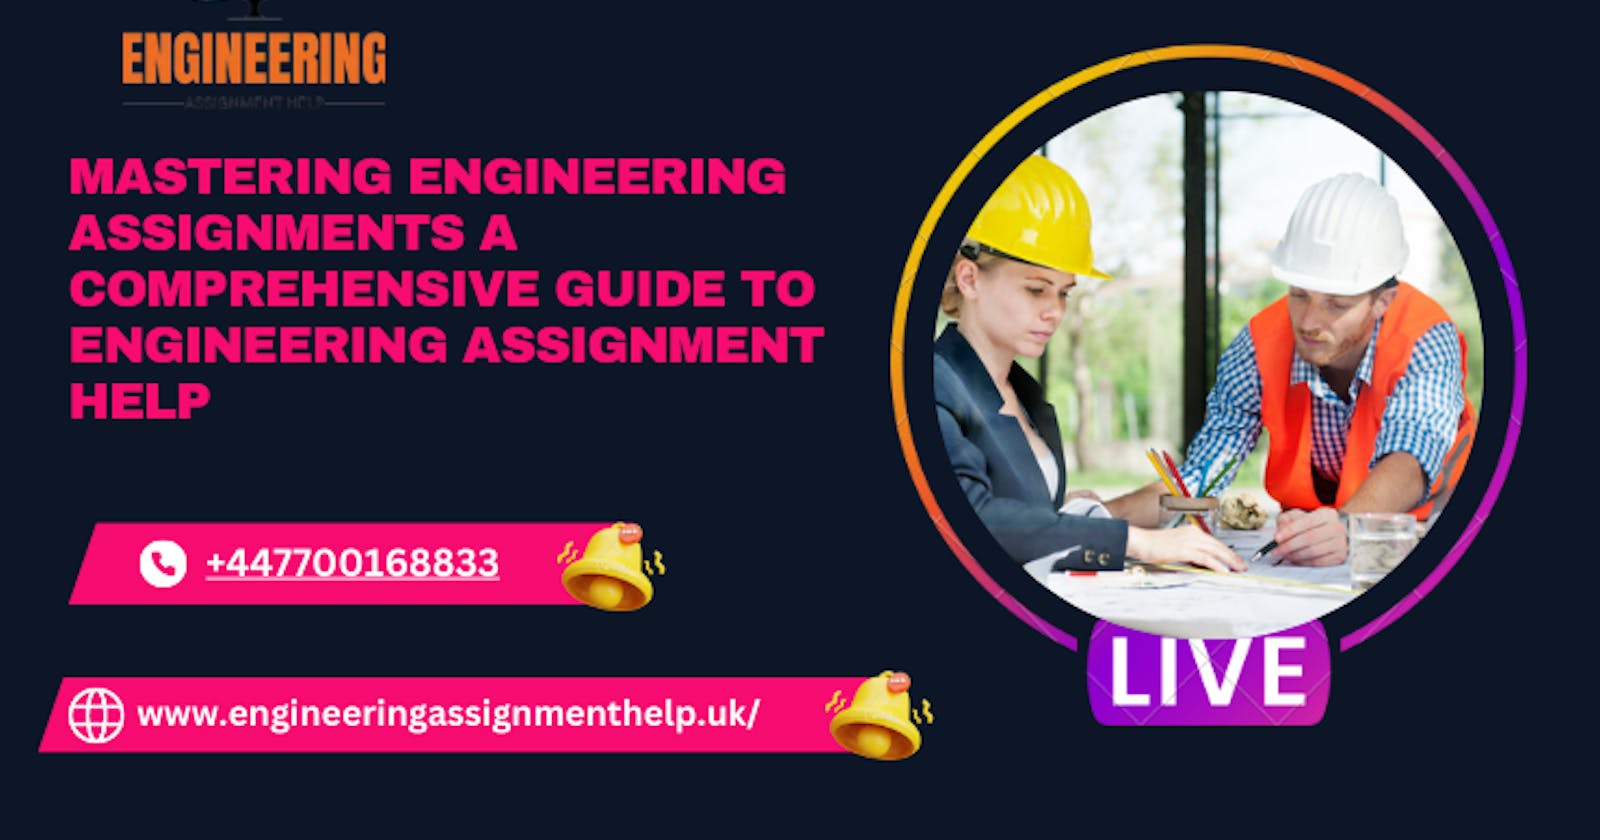 Mastering Engineering Assignments A Comprehensive Guide to Engineering Assignment Help